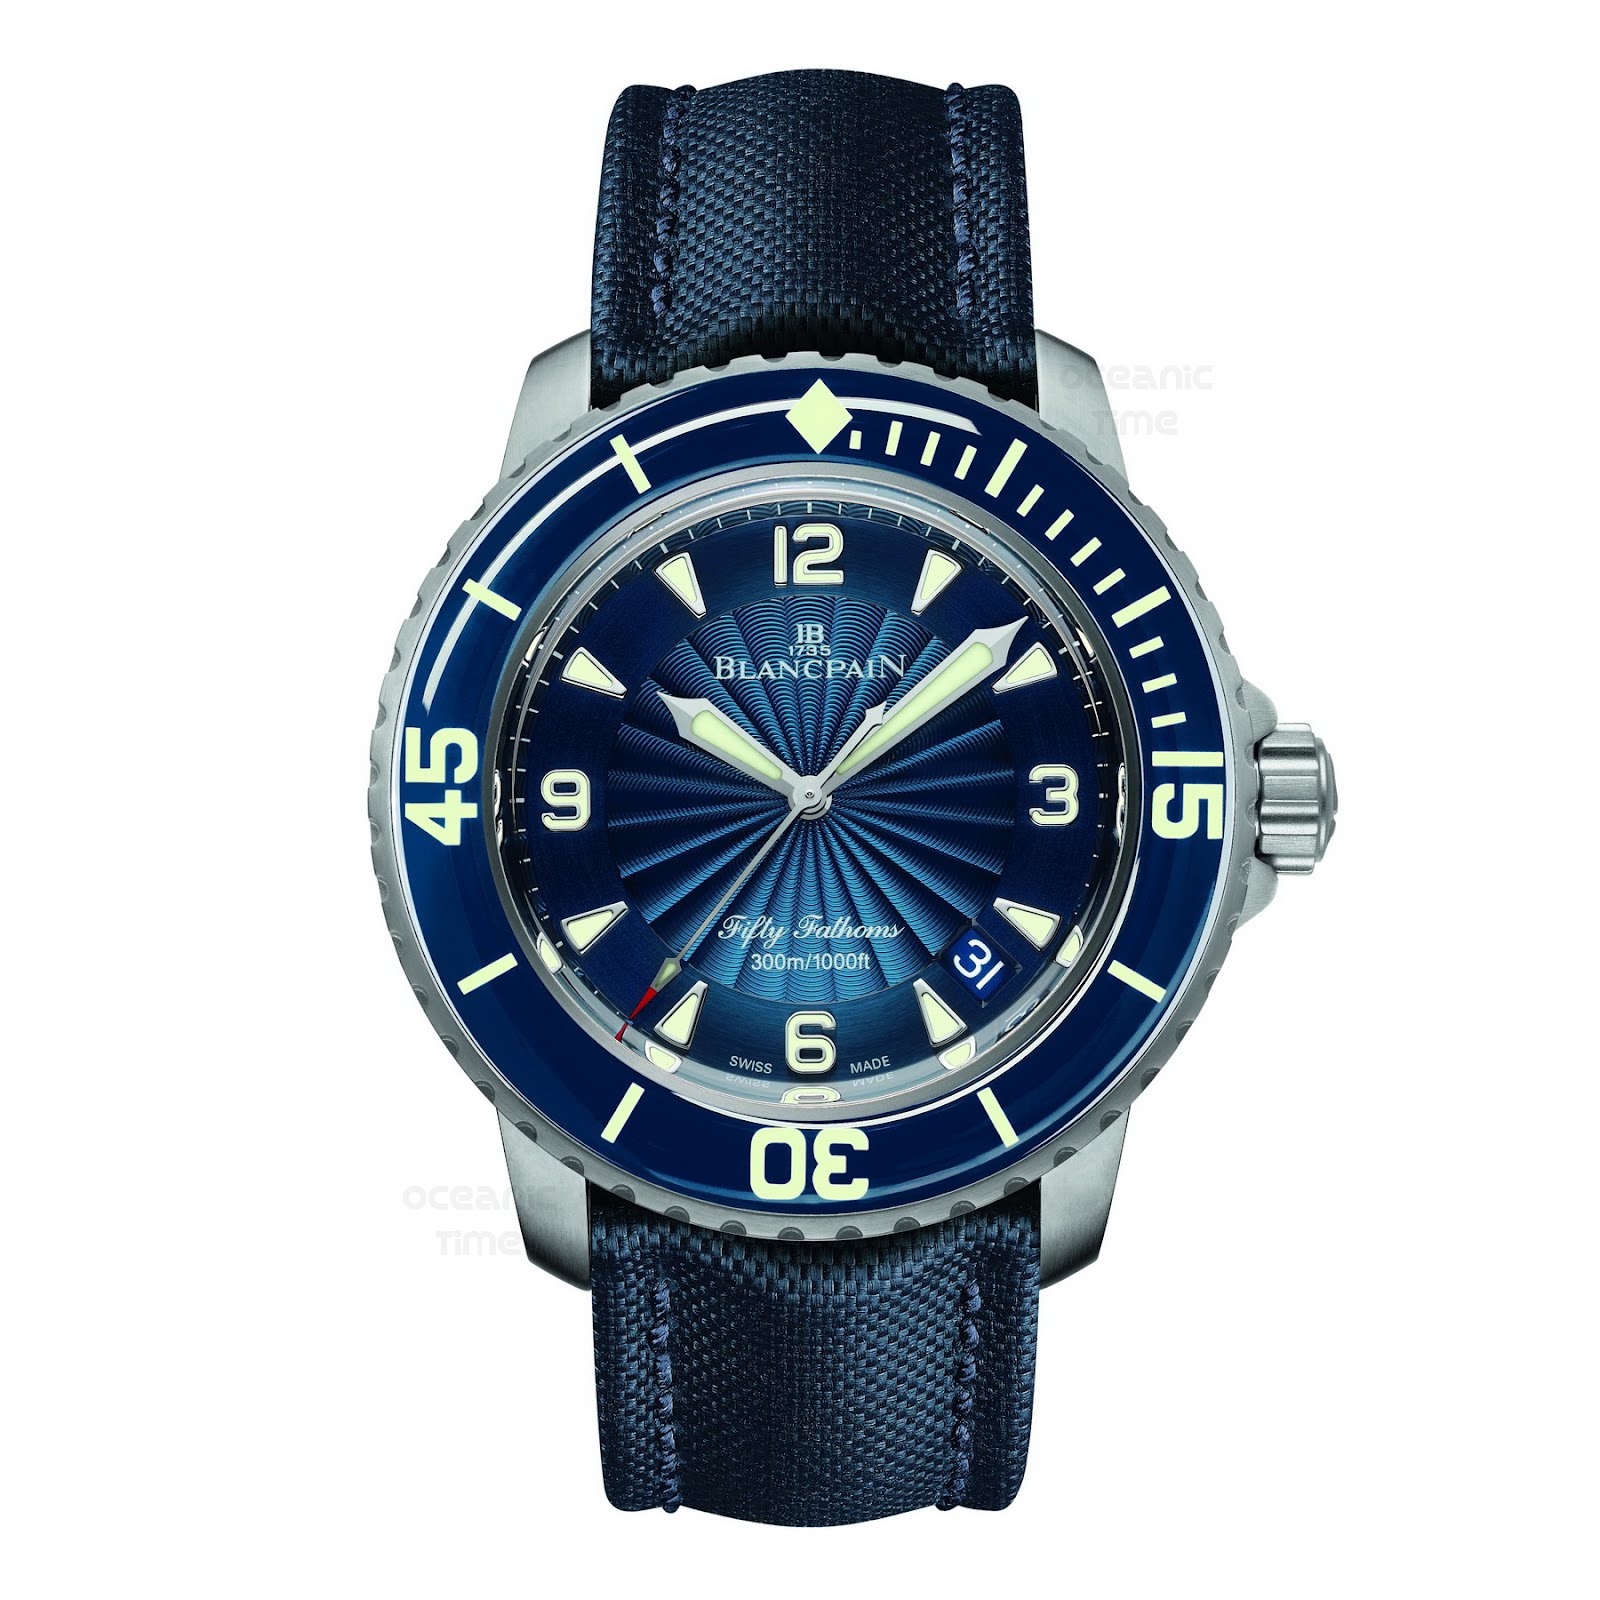 BLANCPAIN%2BFifty%2BFathoms%2BDate%2B%26%2BSECONDS.jpg